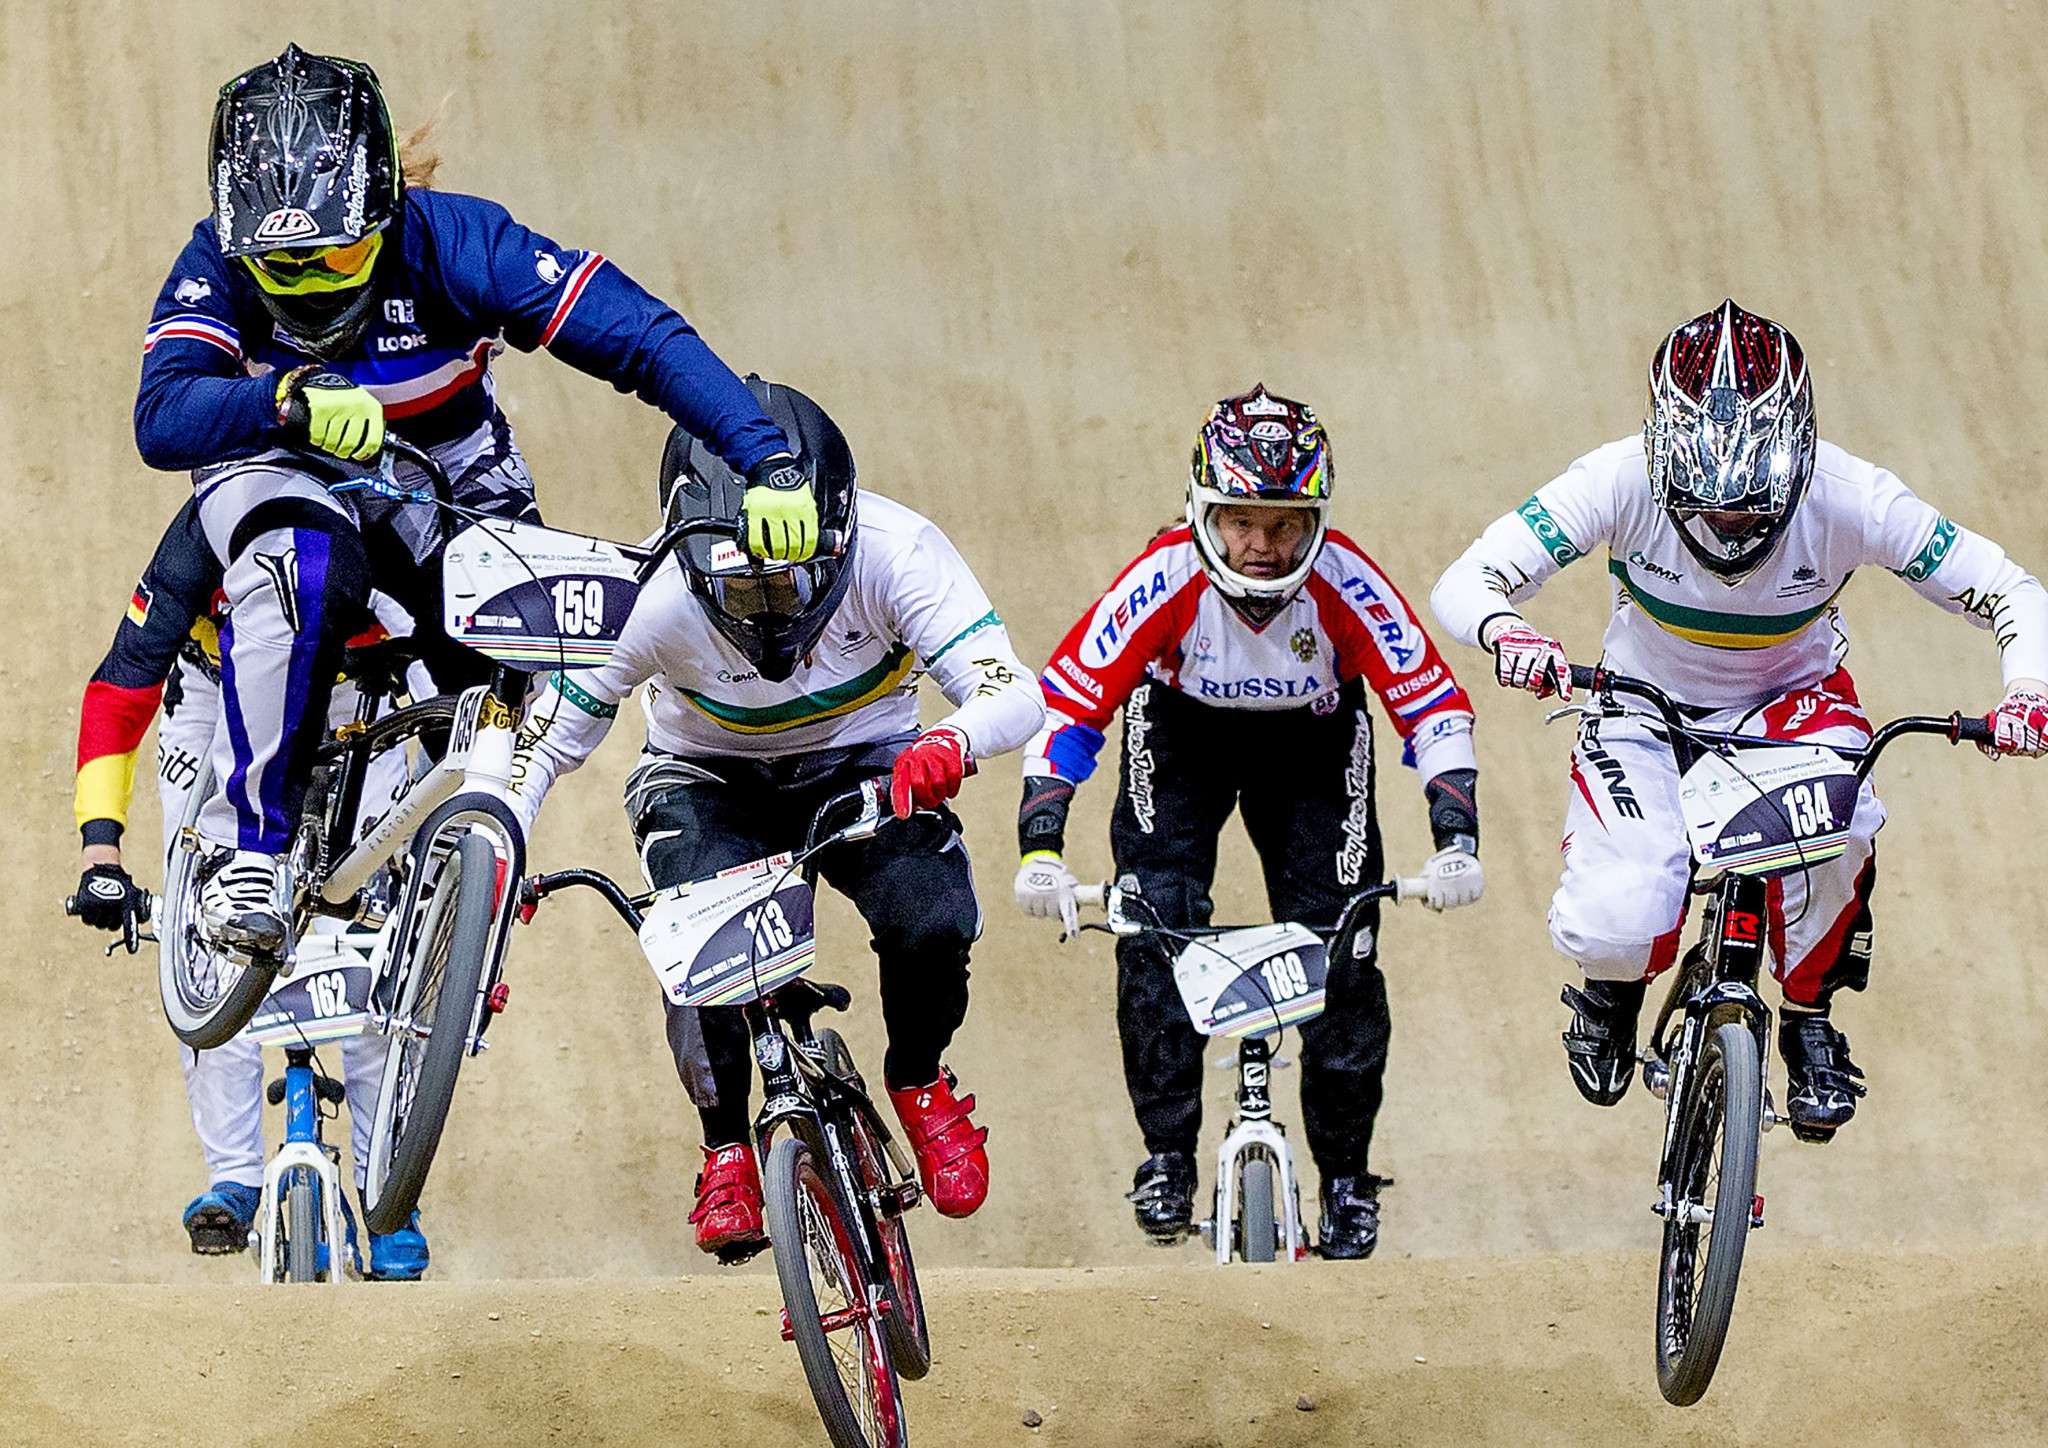 BMX World Championships cancelled as UCI provide update on events